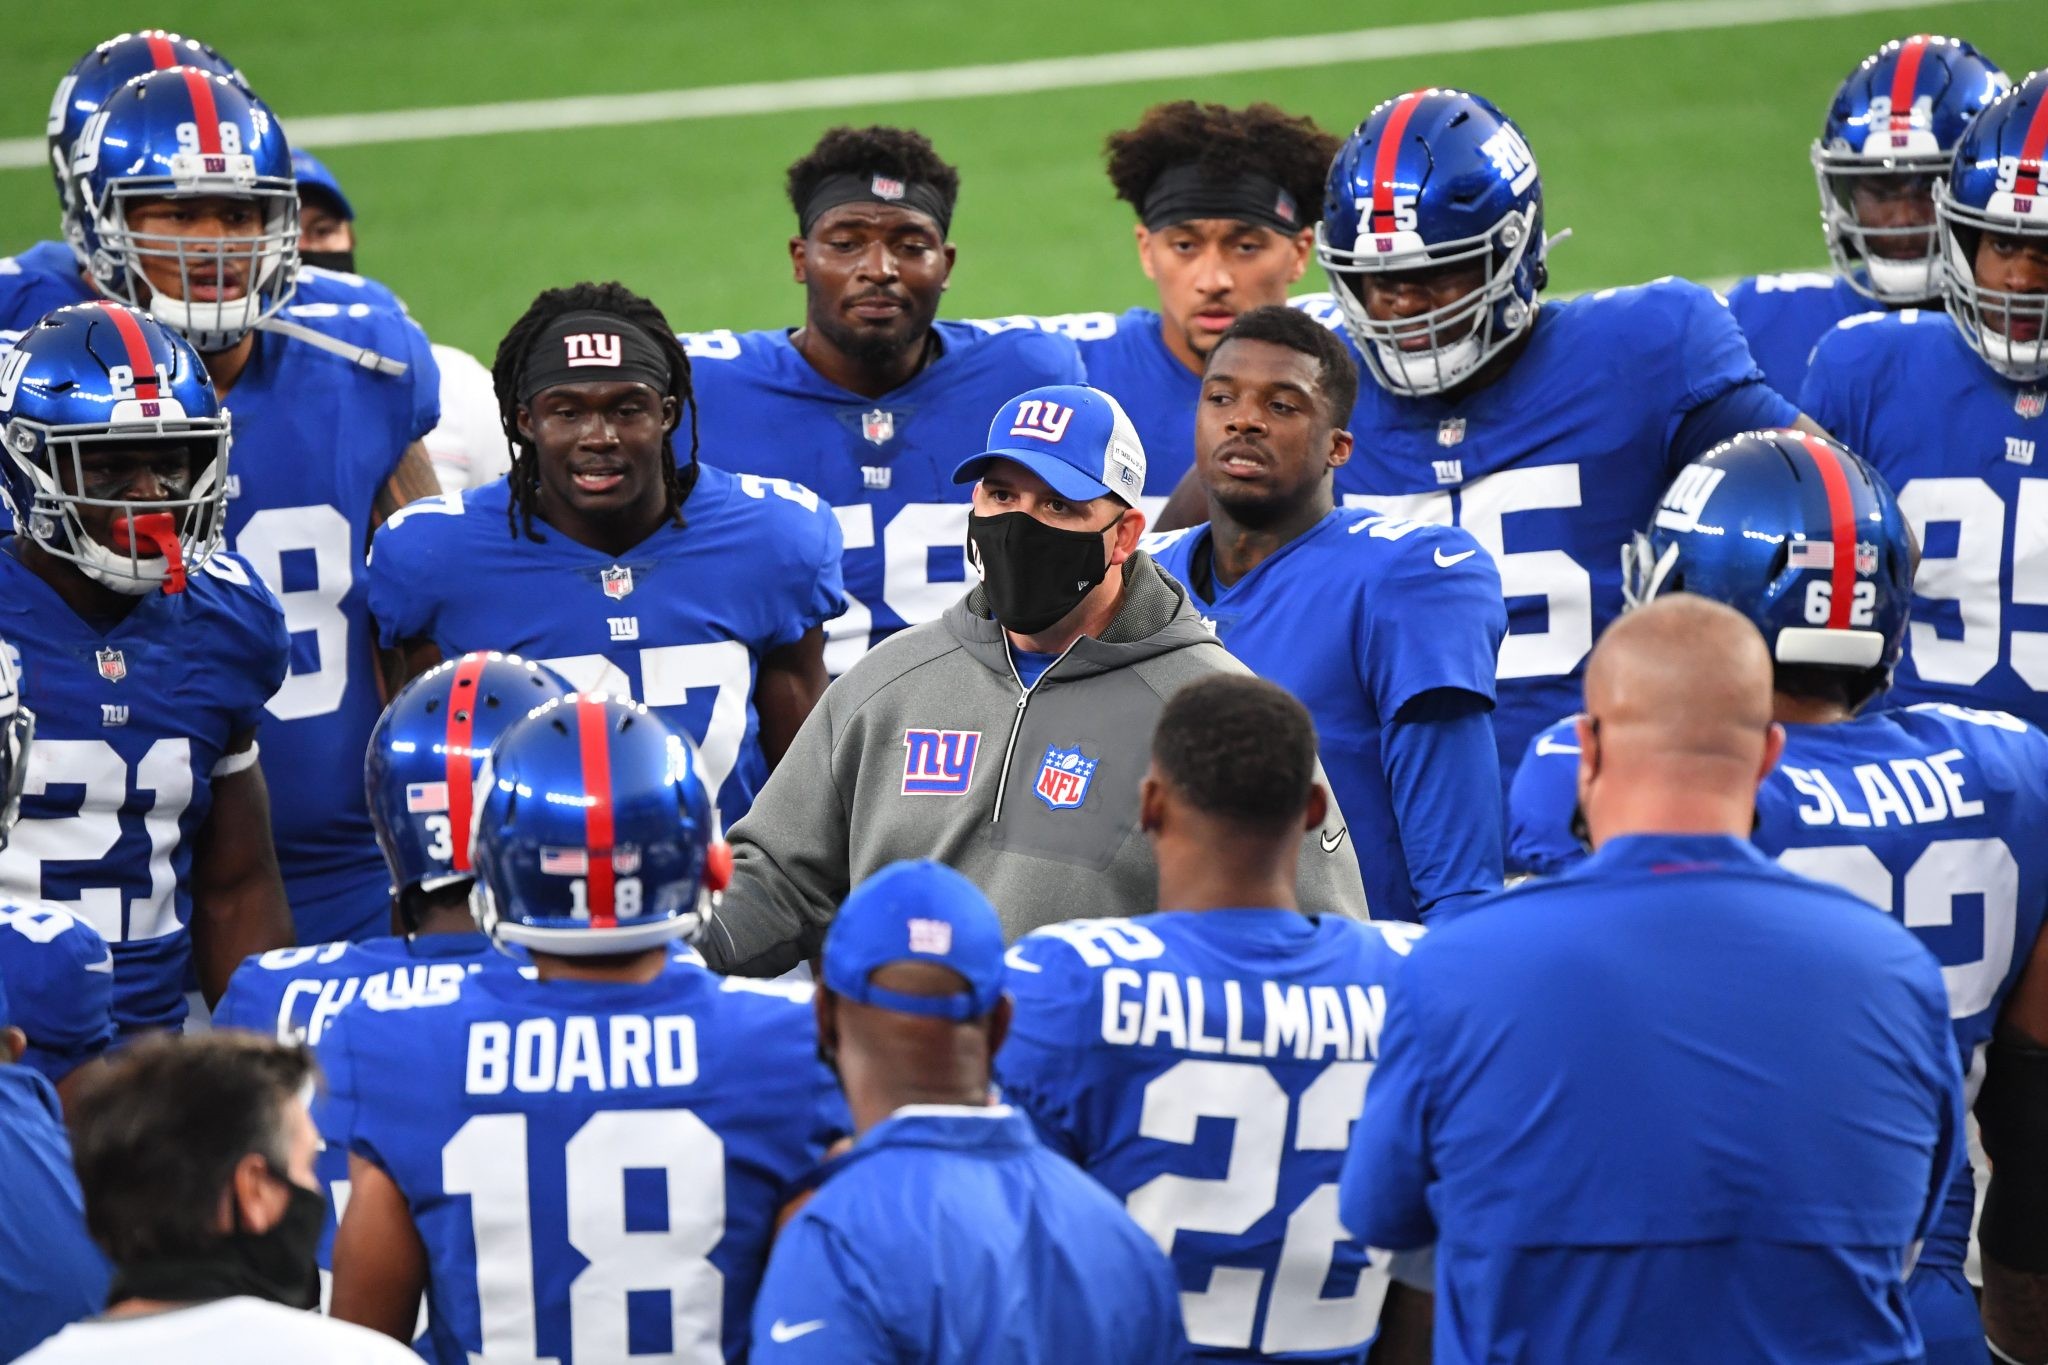 New York Giants Record aside, Giants pose a difficult playoff matchup